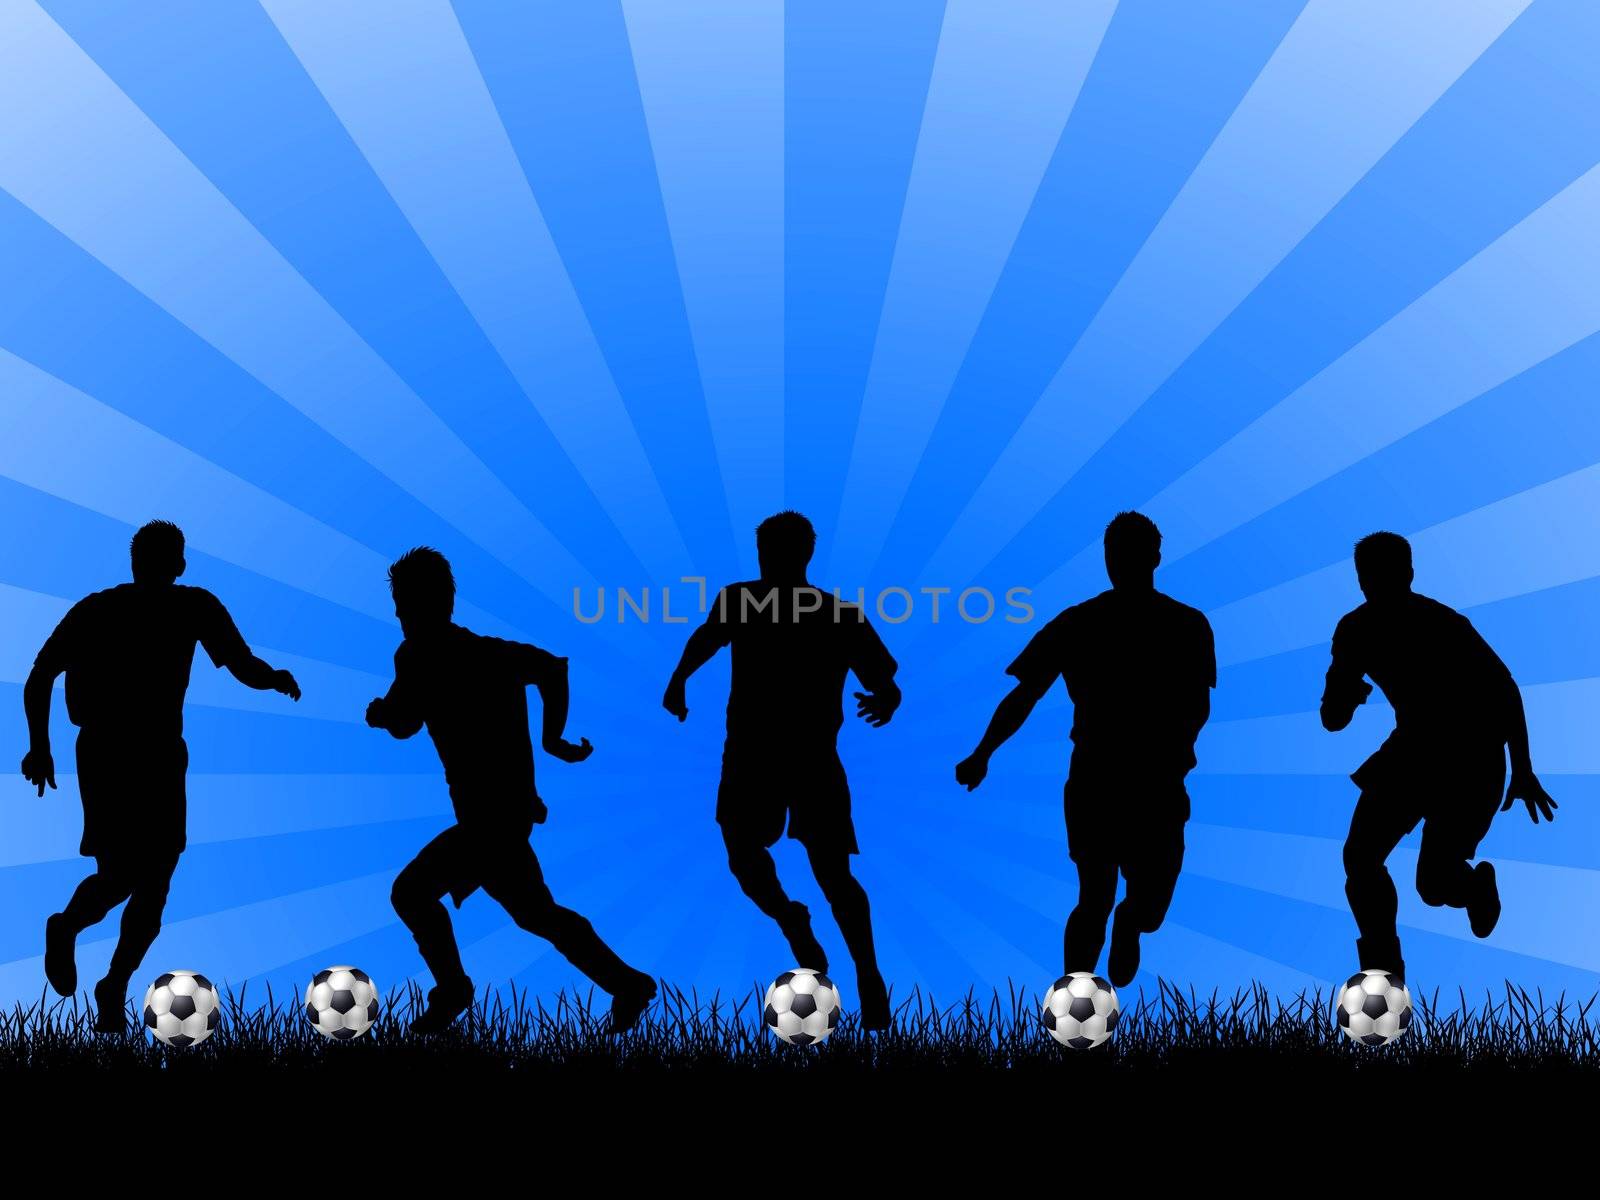 soccer player by peromarketing